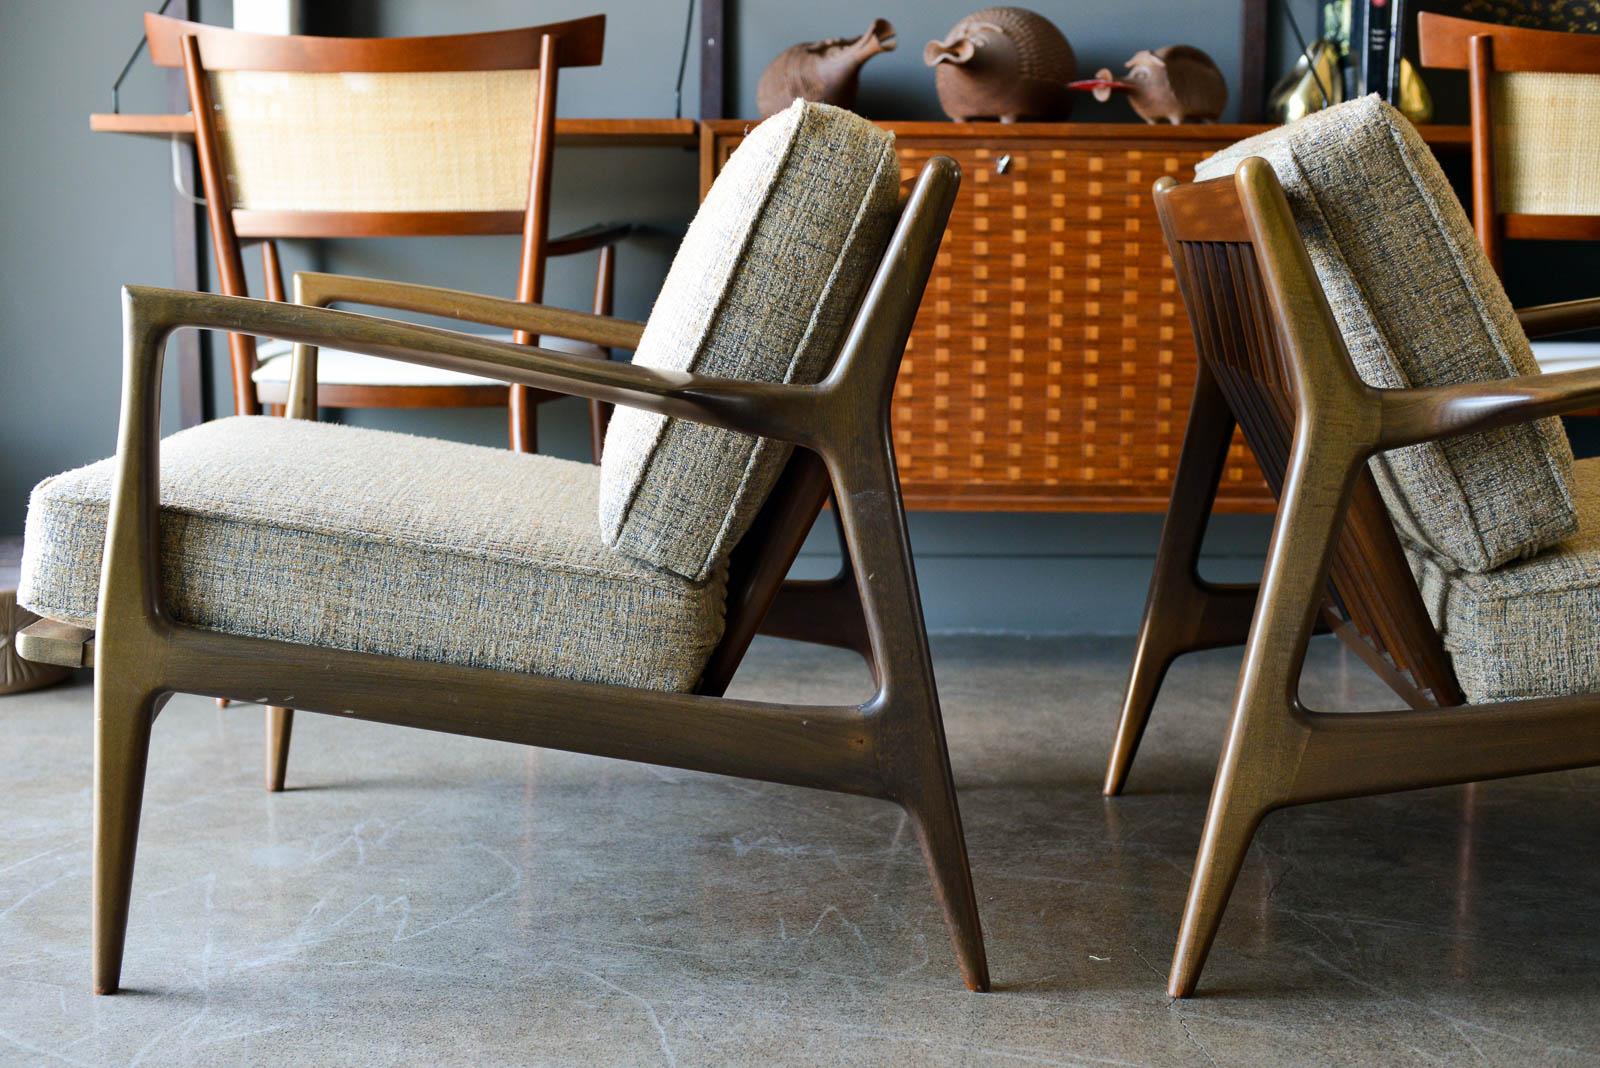 Mid-20th Century Pair of Danish Lounge Chairs by I. B. Kofod-Larsen for Selig, circa 1965